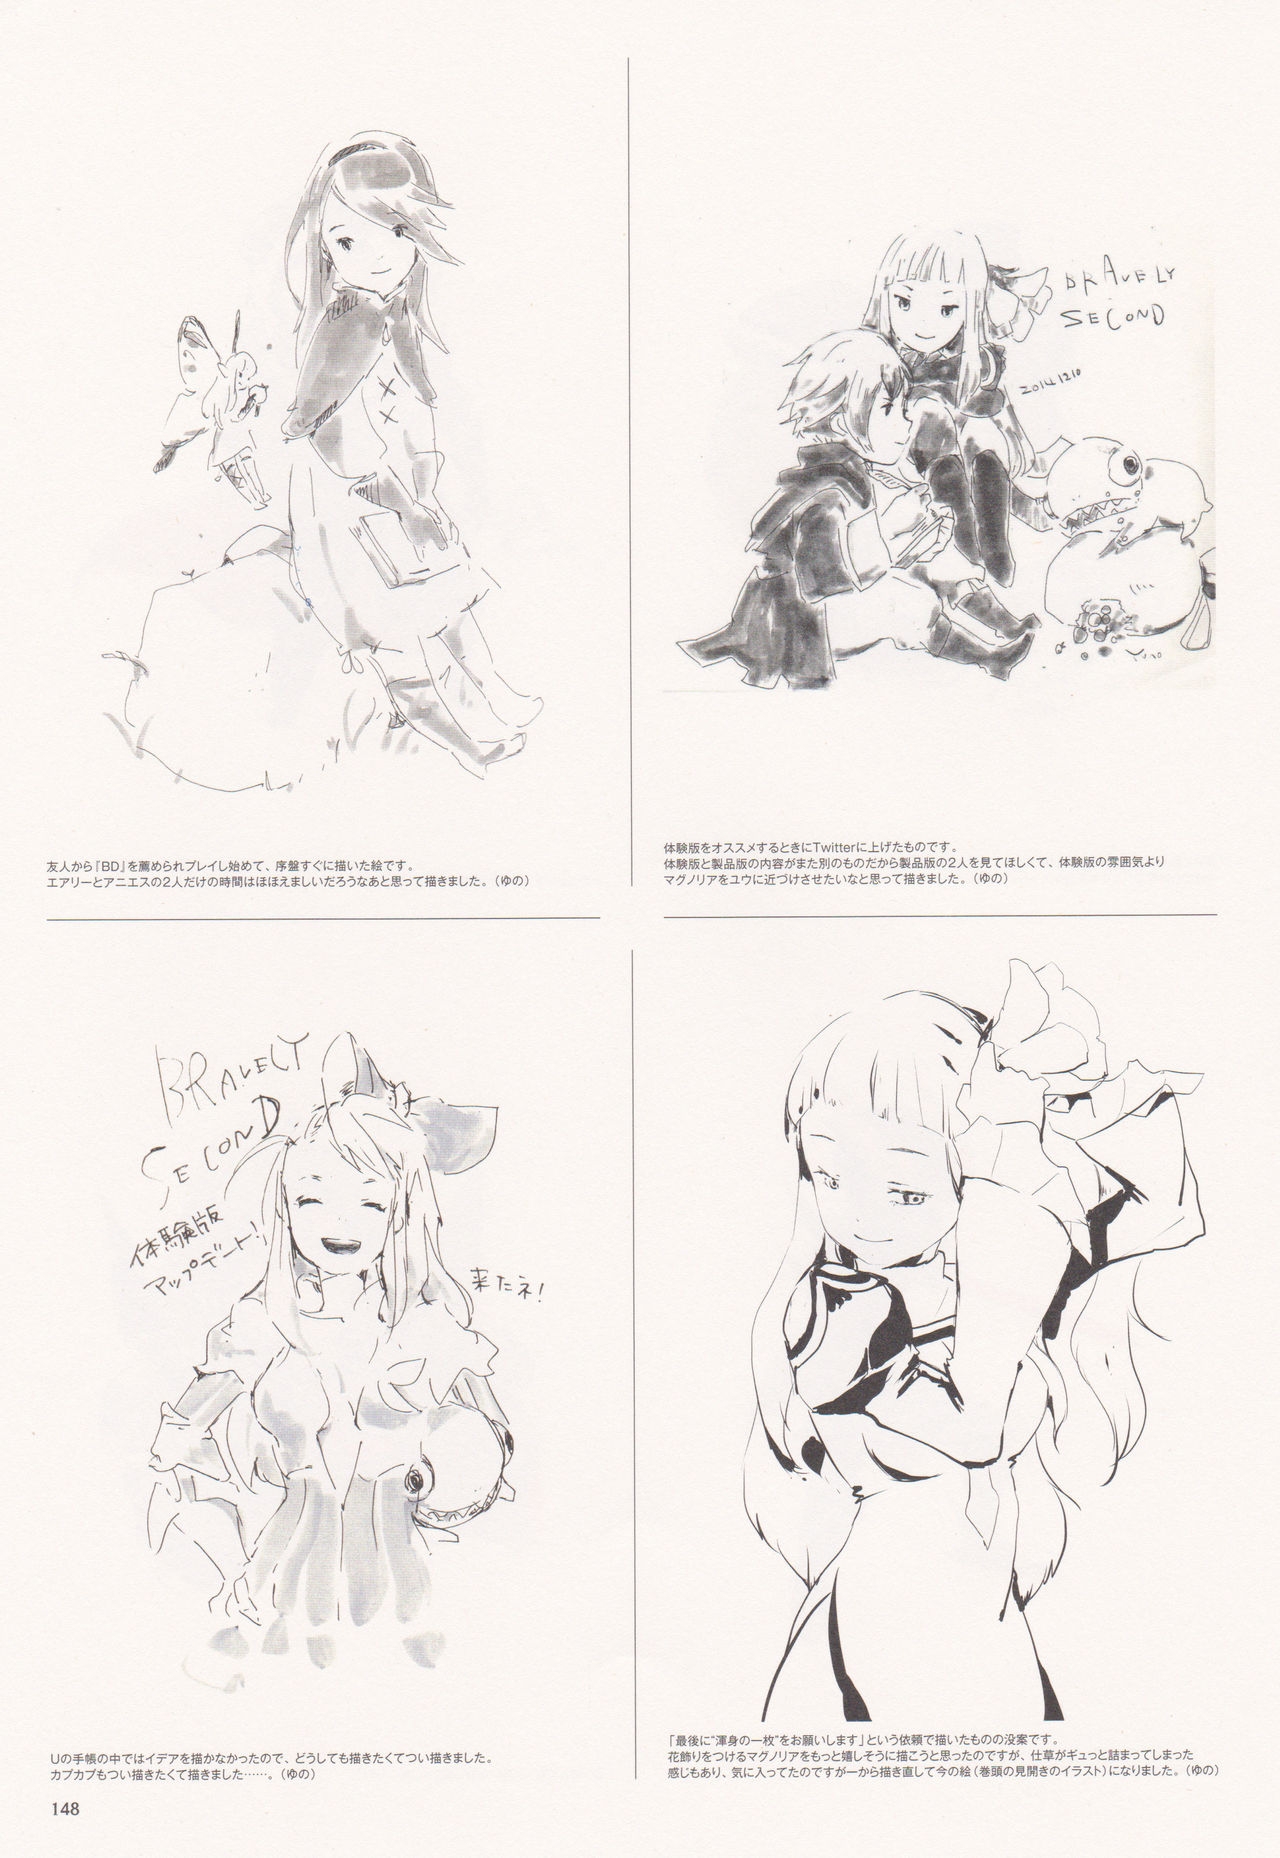 Bravely Second - End Layer - Design Works THE ART OF BRAVELY 2013-2015 148